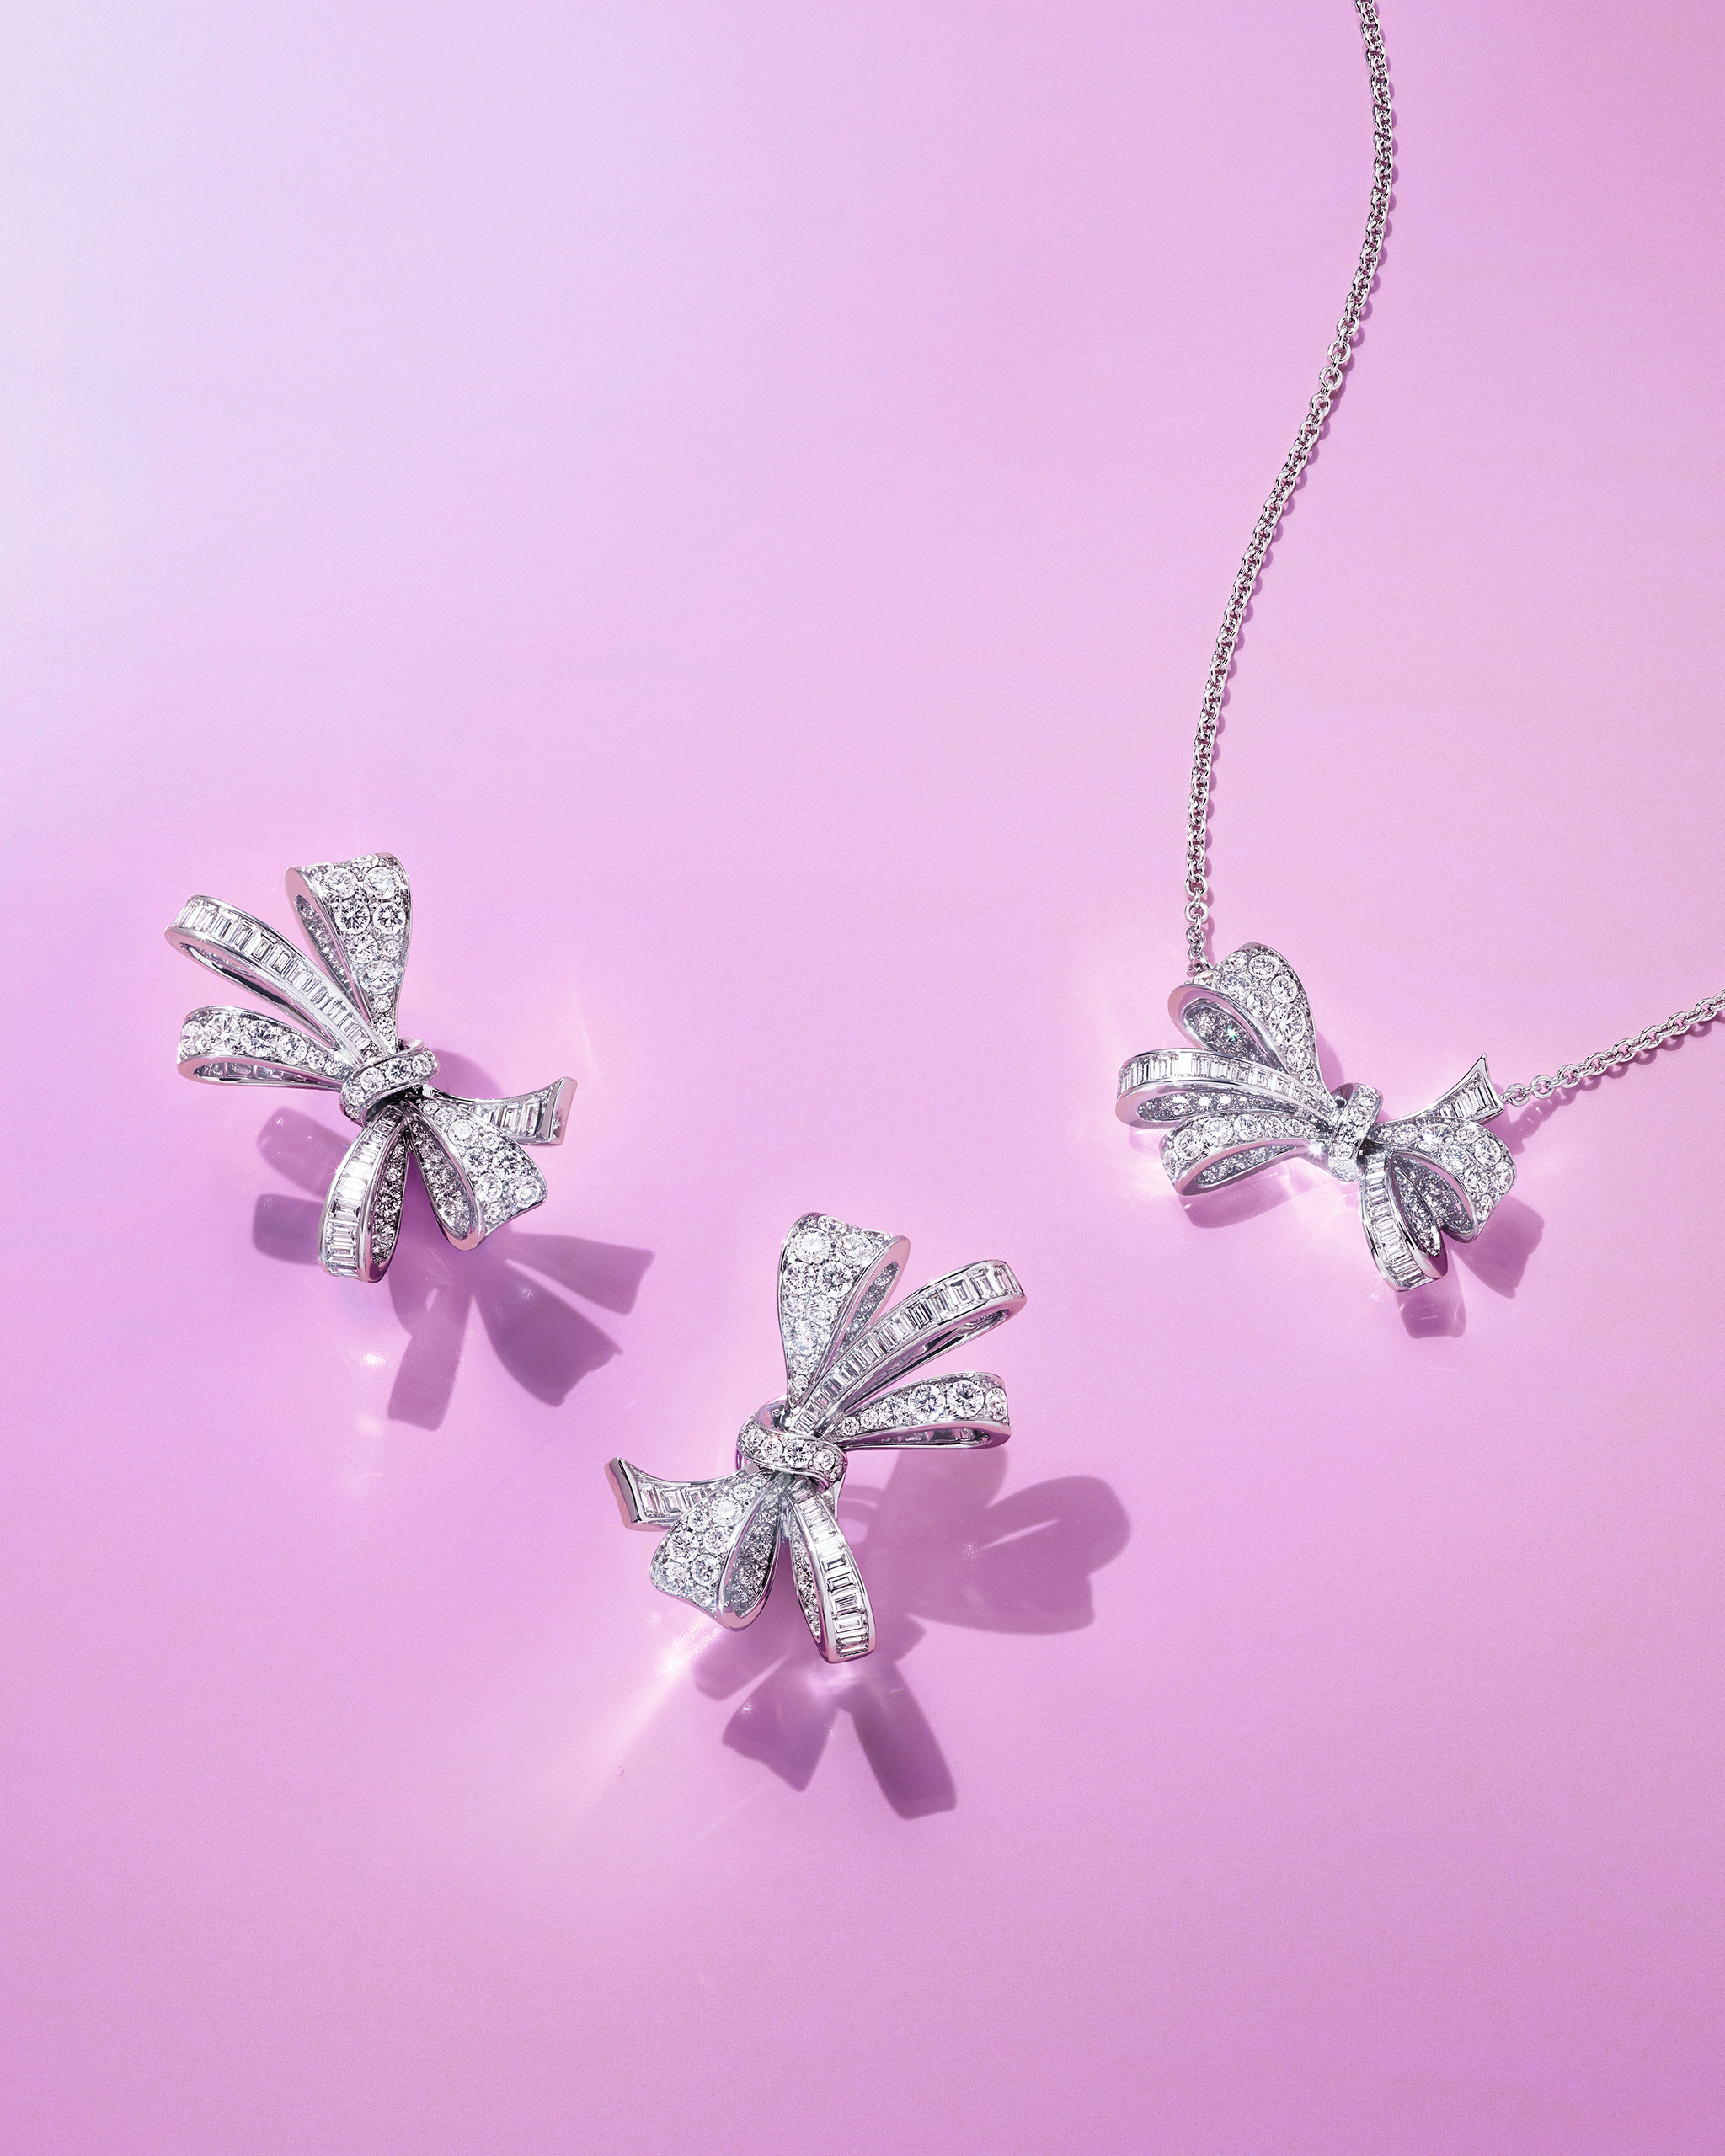 Bracelets, necklaces and even tiaras to add more bling to your wedding from luxury houses like Graff, with its meaningful knotted pieces from the Tilda’s Bow Collection shown here. Photo: Graff